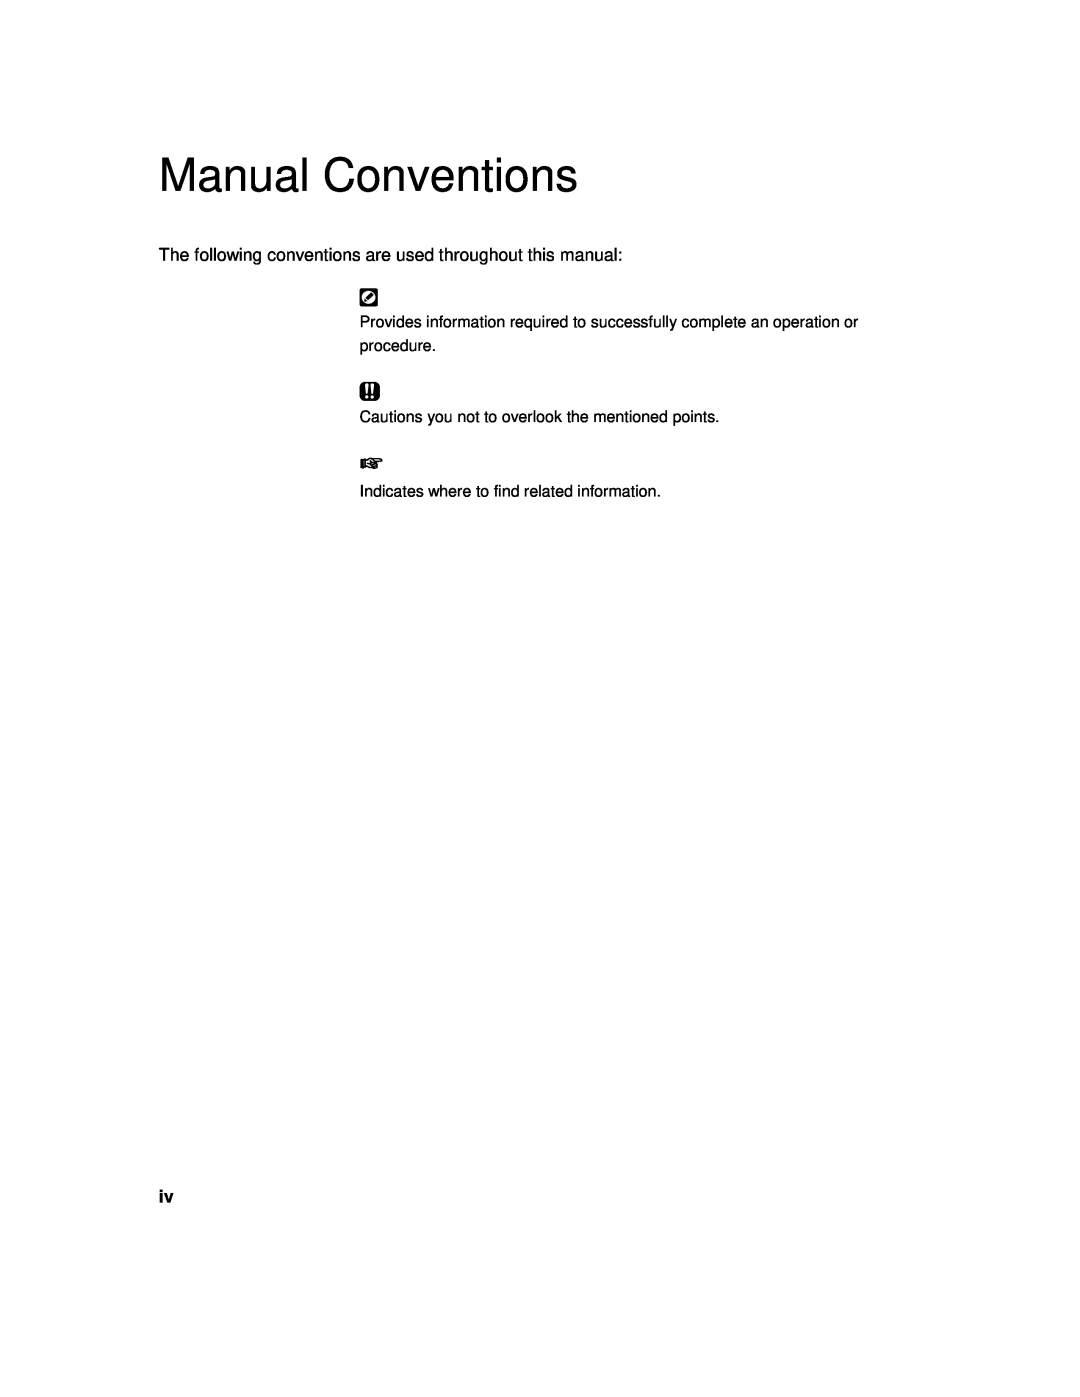 Xerox P12 Manual Conventions, The following conventions are used throughout this manual 